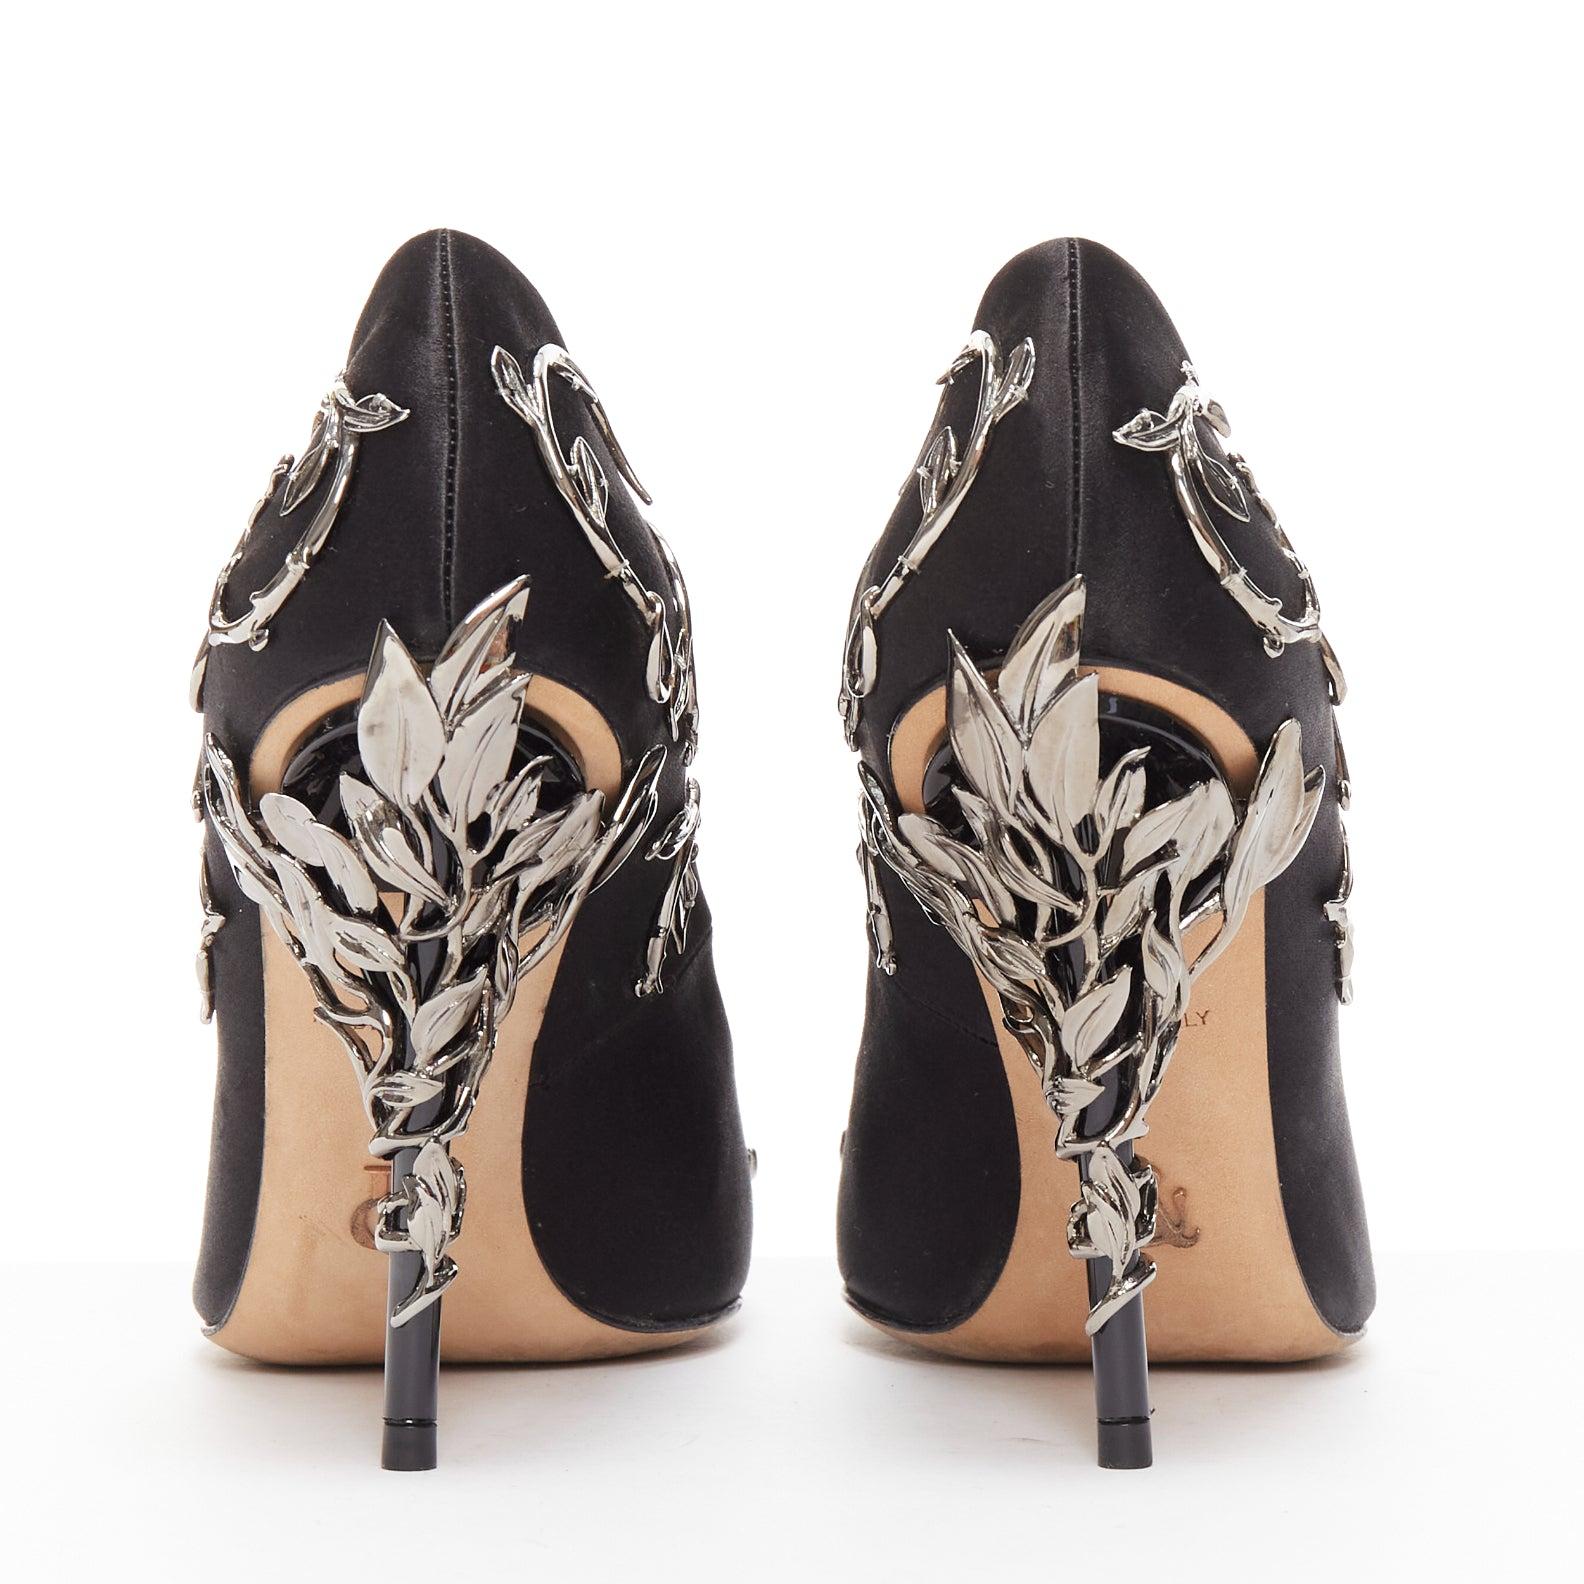 RALPH RUSSO Eden black satin gunmetal embellishments pointed pumps EU35
Reference: YIKK/A00042
Brand: Ralph Russo
Model: Eden
Material: Satin, Metal
Color: Black, Silver
Pattern: Solid
Closure: Slip On
Lining: Nude Leather
Extra Details: Leaf